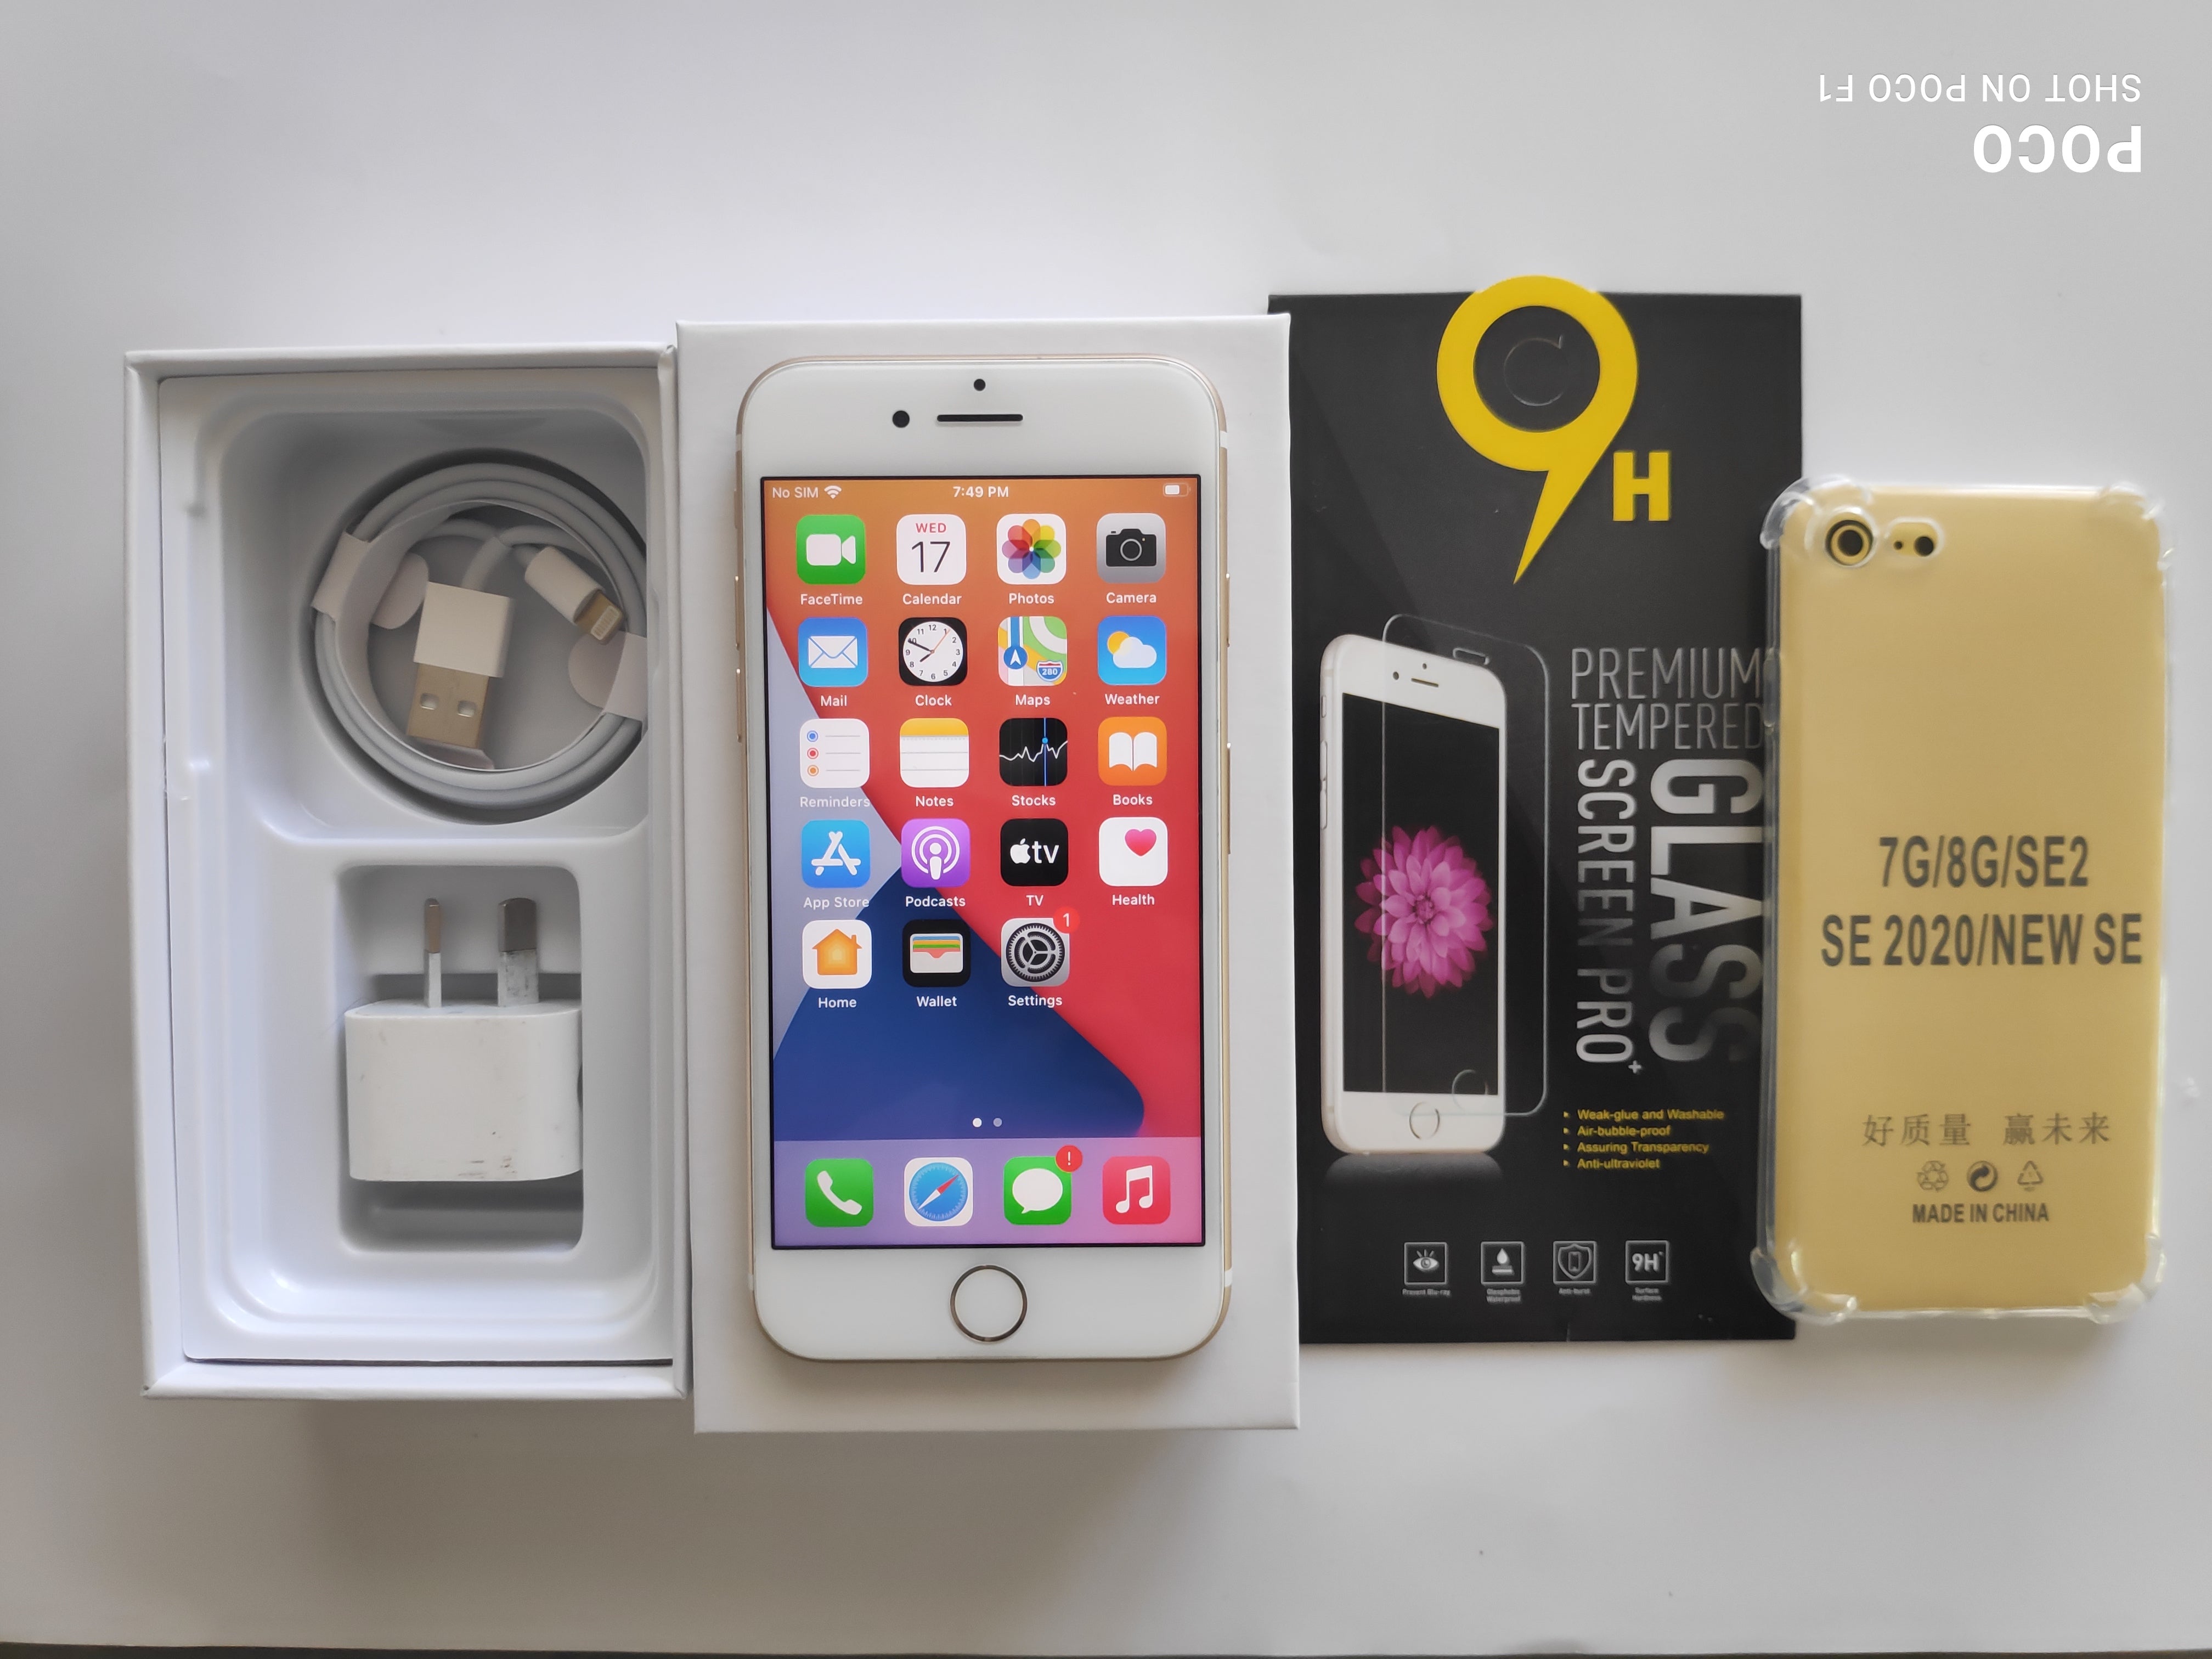 Apple iPhone 7 32GB Space Gold - New Battery, Case, Glass Screen Protector & Shipping (As New)